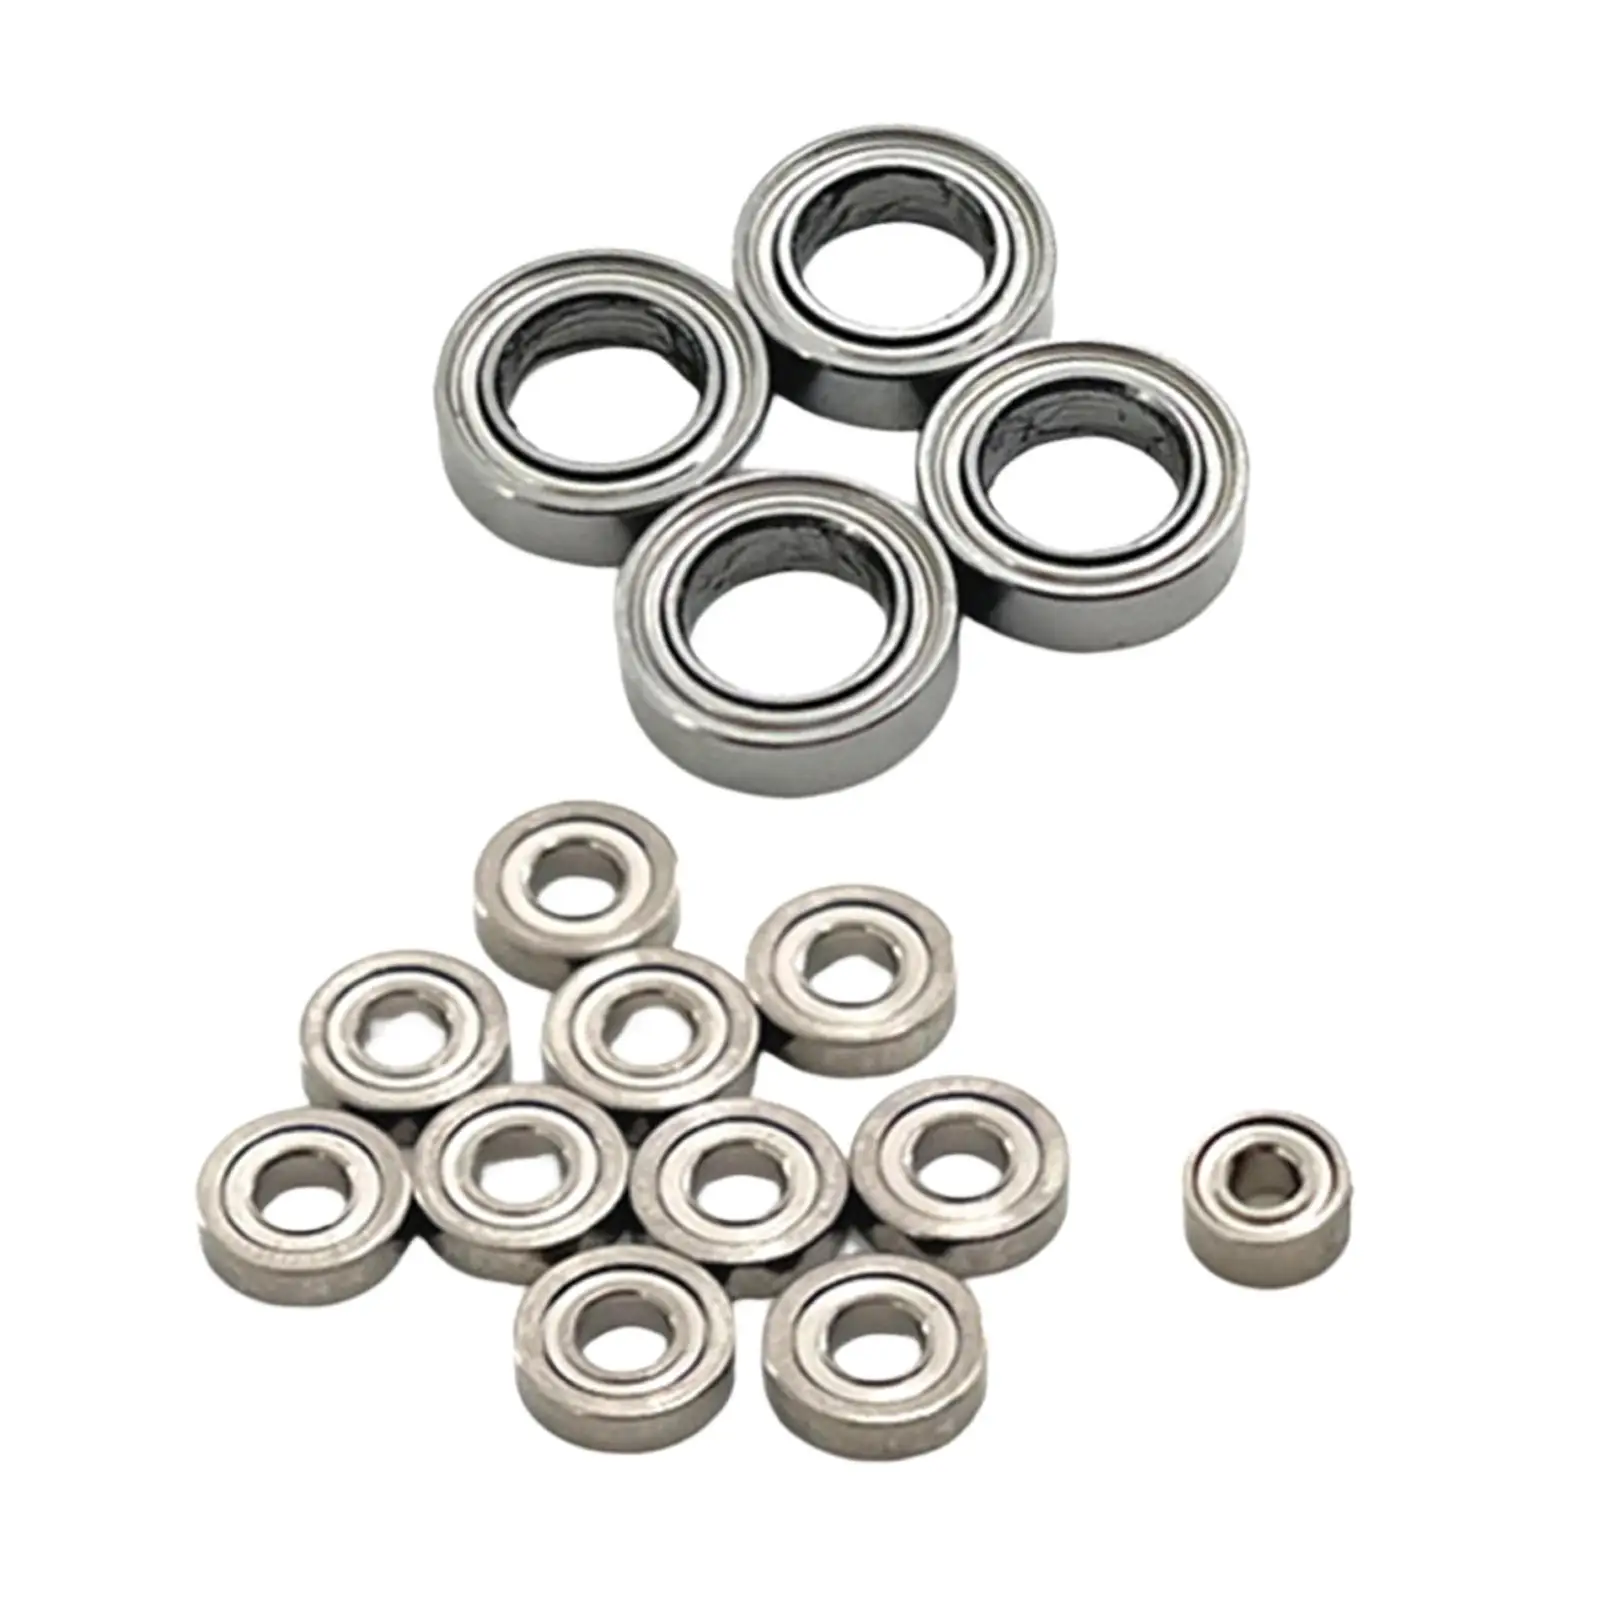 15Pcs Ball Bearings Durable Replacements for Wltoys 1/28 Scale RC Car Crawler